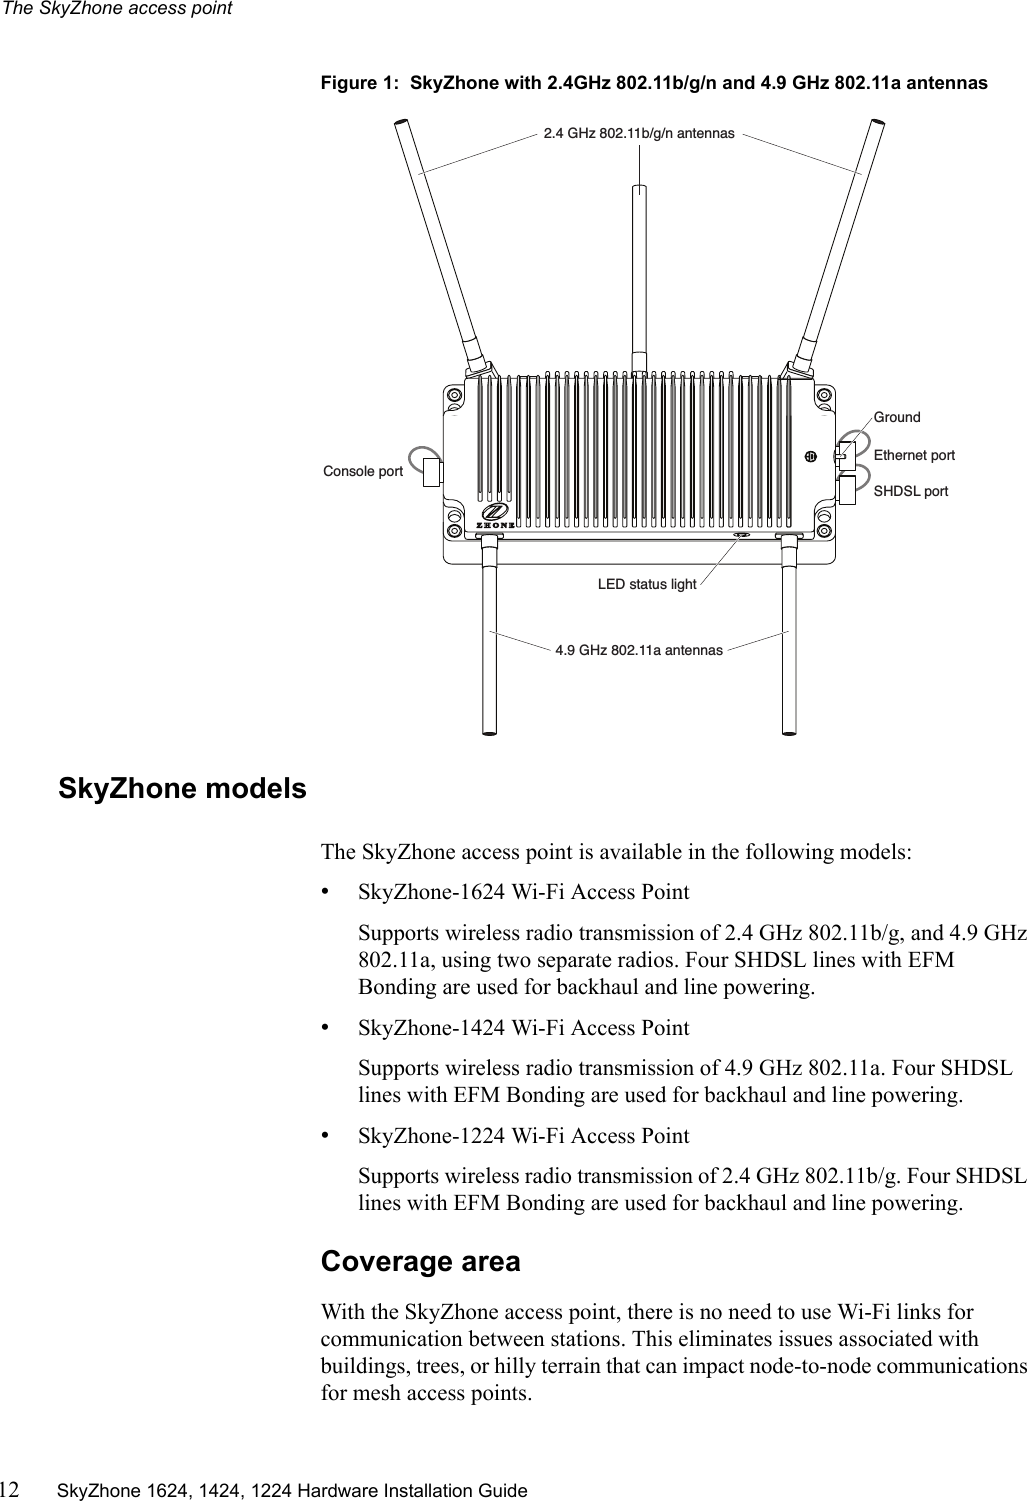 The SkyZhone access point12 SkyZhone 1624, 1424, 1224 Hardware Installation GuideFigure 1:  SkyZhone with 2.4GHz 802.11b/g/n and 4.9 GHz 802.11a antennasSkyZhone modelsThe SkyZhone access point is available in the following models:•SkyZhone-1624 Wi-Fi Access PointSupports wireless radio transmission of 2.4 GHz 802.11b/g, and 4.9 GHz 802.11a, using two separate radios. Four SHDSL lines with EFM Bonding are used for backhaul and line powering.•SkyZhone-1424 Wi-Fi Access PointSupports wireless radio transmission of 4.9 GHz 802.11a. Four SHDSL lines with EFM Bonding are used for backhaul and line powering.•SkyZhone-1224 Wi-Fi Access PointSupports wireless radio transmission of 2.4 GHz 802.11b/g. Four SHDSL lines with EFM Bonding are used for backhaul and line powering.Coverage areaWith the SkyZhone access point, there is no need to use Wi-Fi links for communication between stations. This eliminates issues associated with buildings, trees, or hilly terrain that can impact node-to-node communications for mesh access points.Console portEthernet portGroundSHDSL portLED status light4.9 GHz 802.11a antennas2.4 GHz 802.11b/g/n antennas